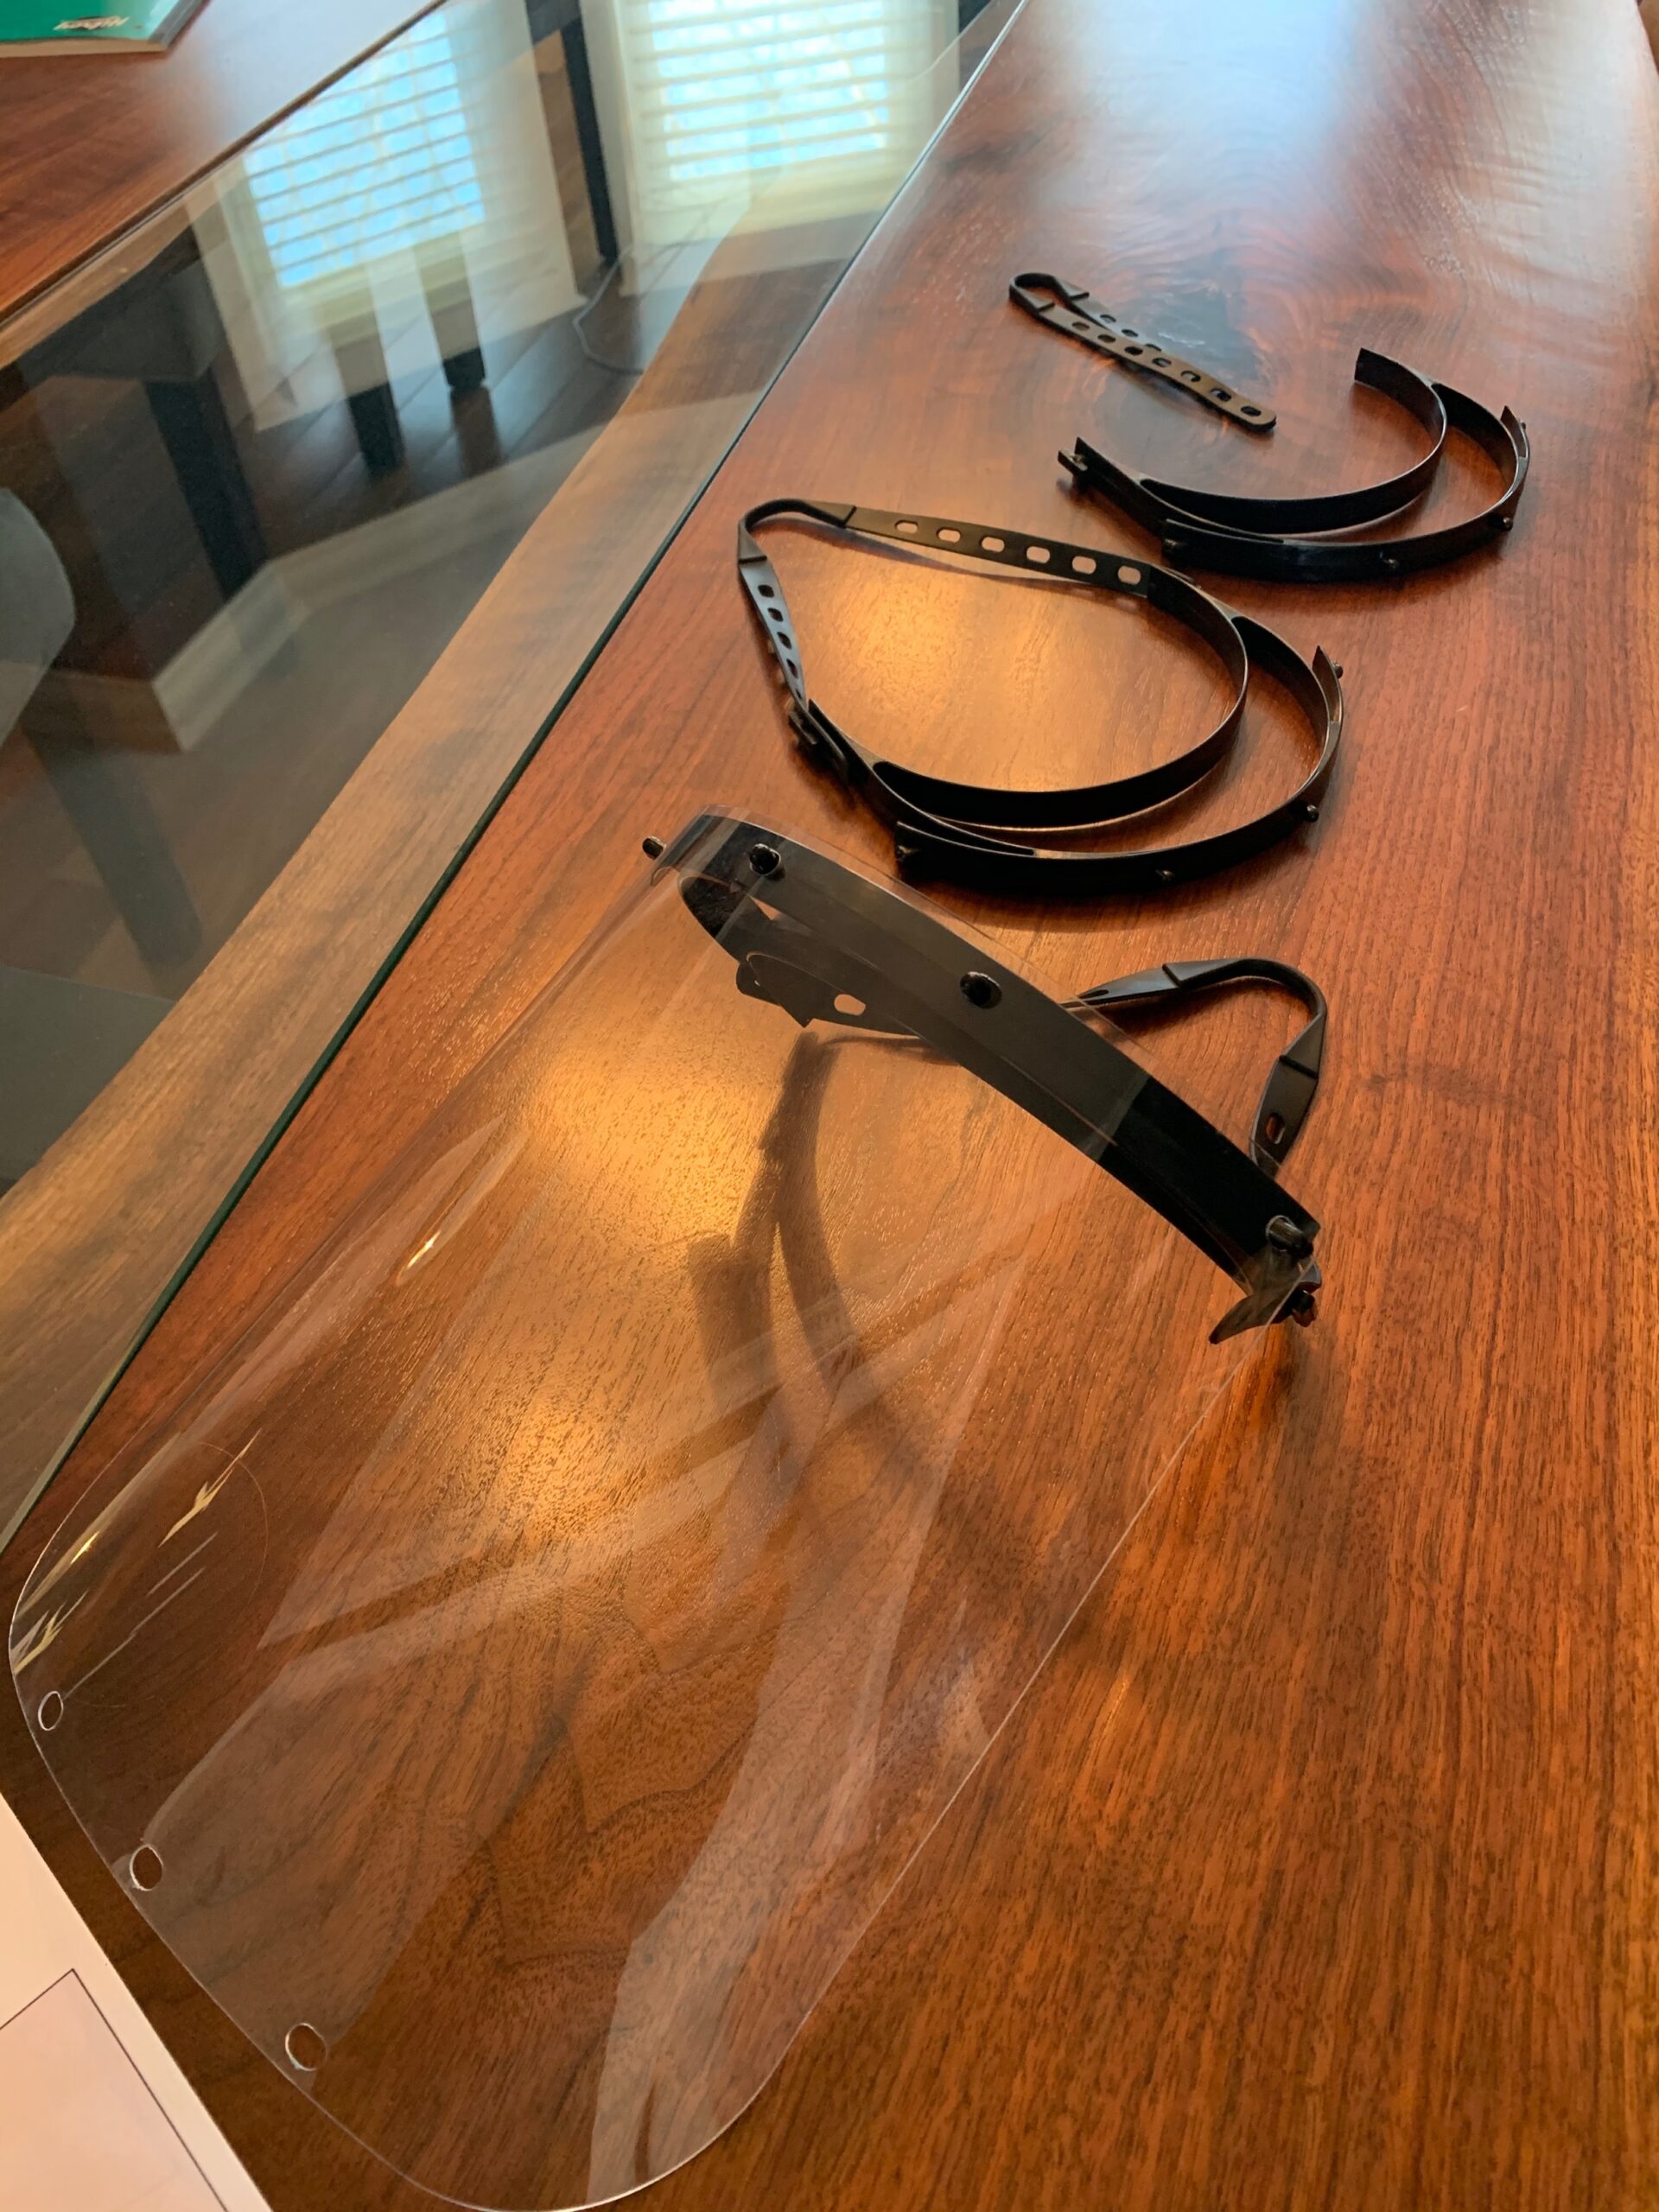 Face shield and its related equipment on a wooden table